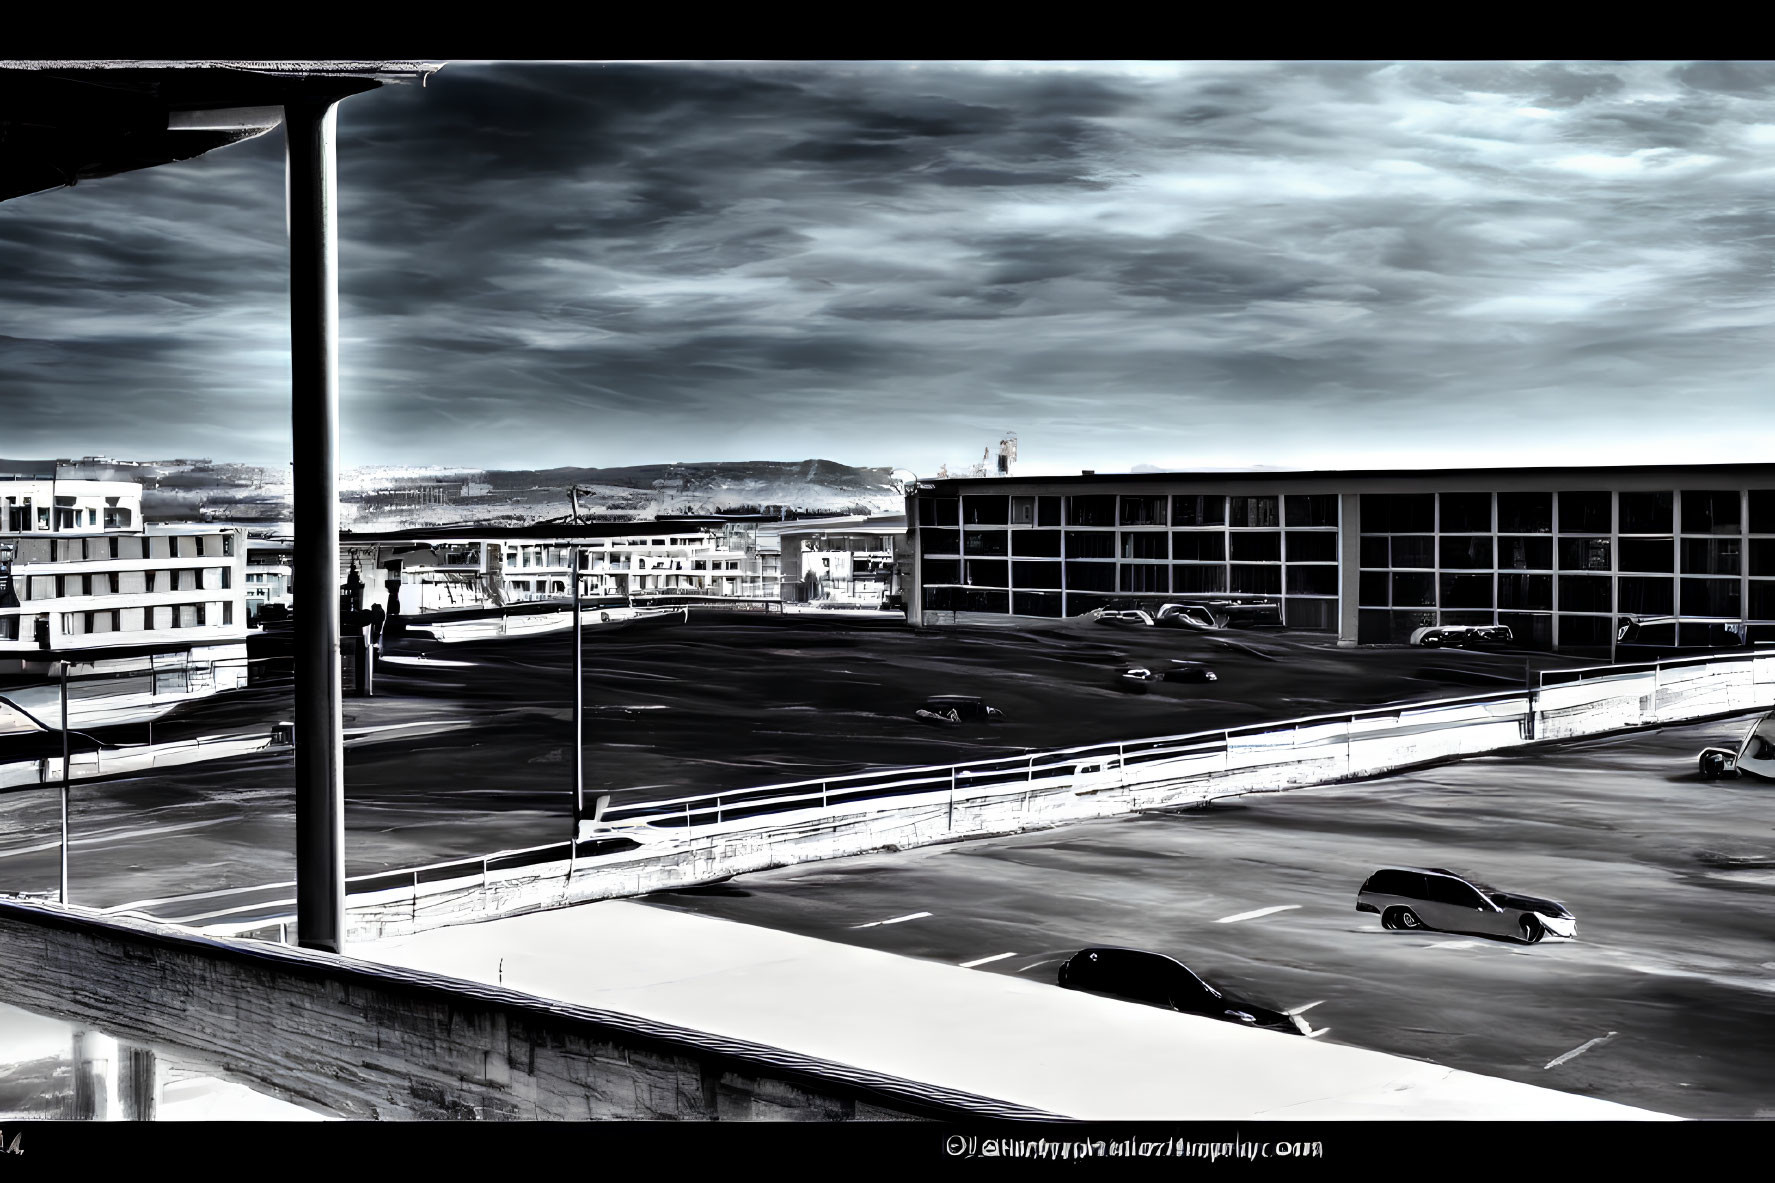 High-contrast parking lot scene with cars and buildings under dramatic sky